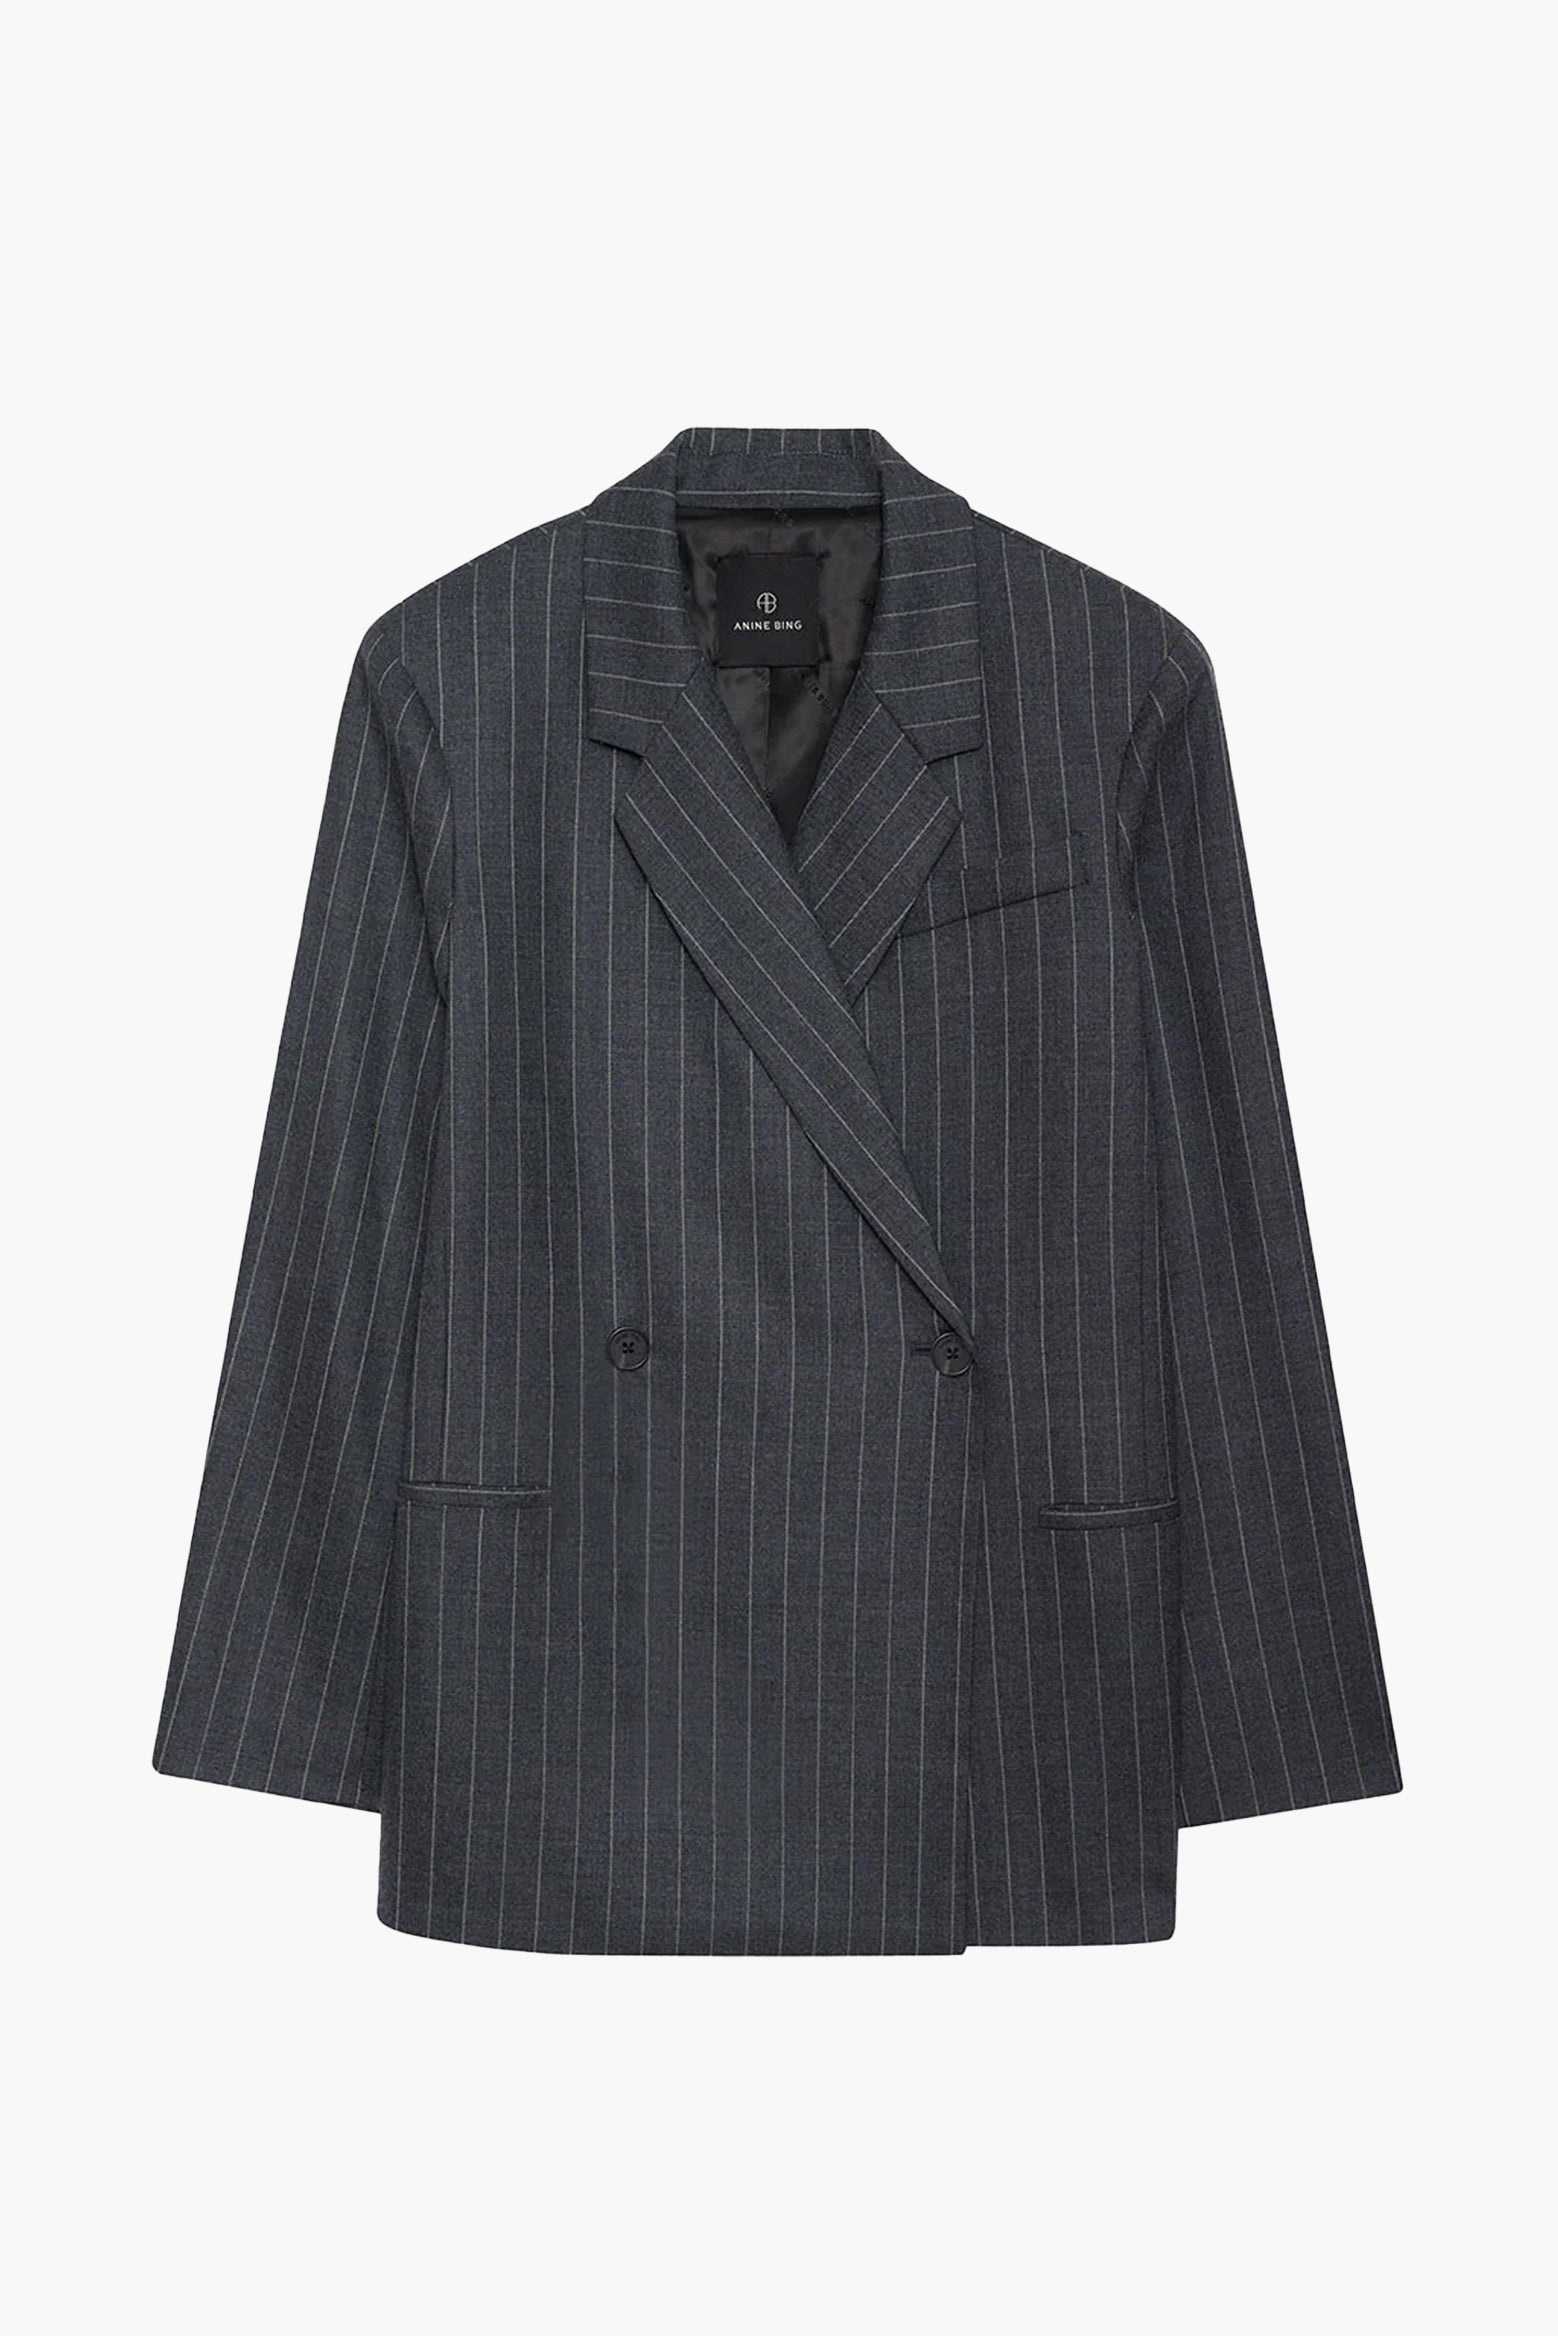 Anine Bing Kaia Blazer in Grey Pinstripe available at The New Trend Australia. 